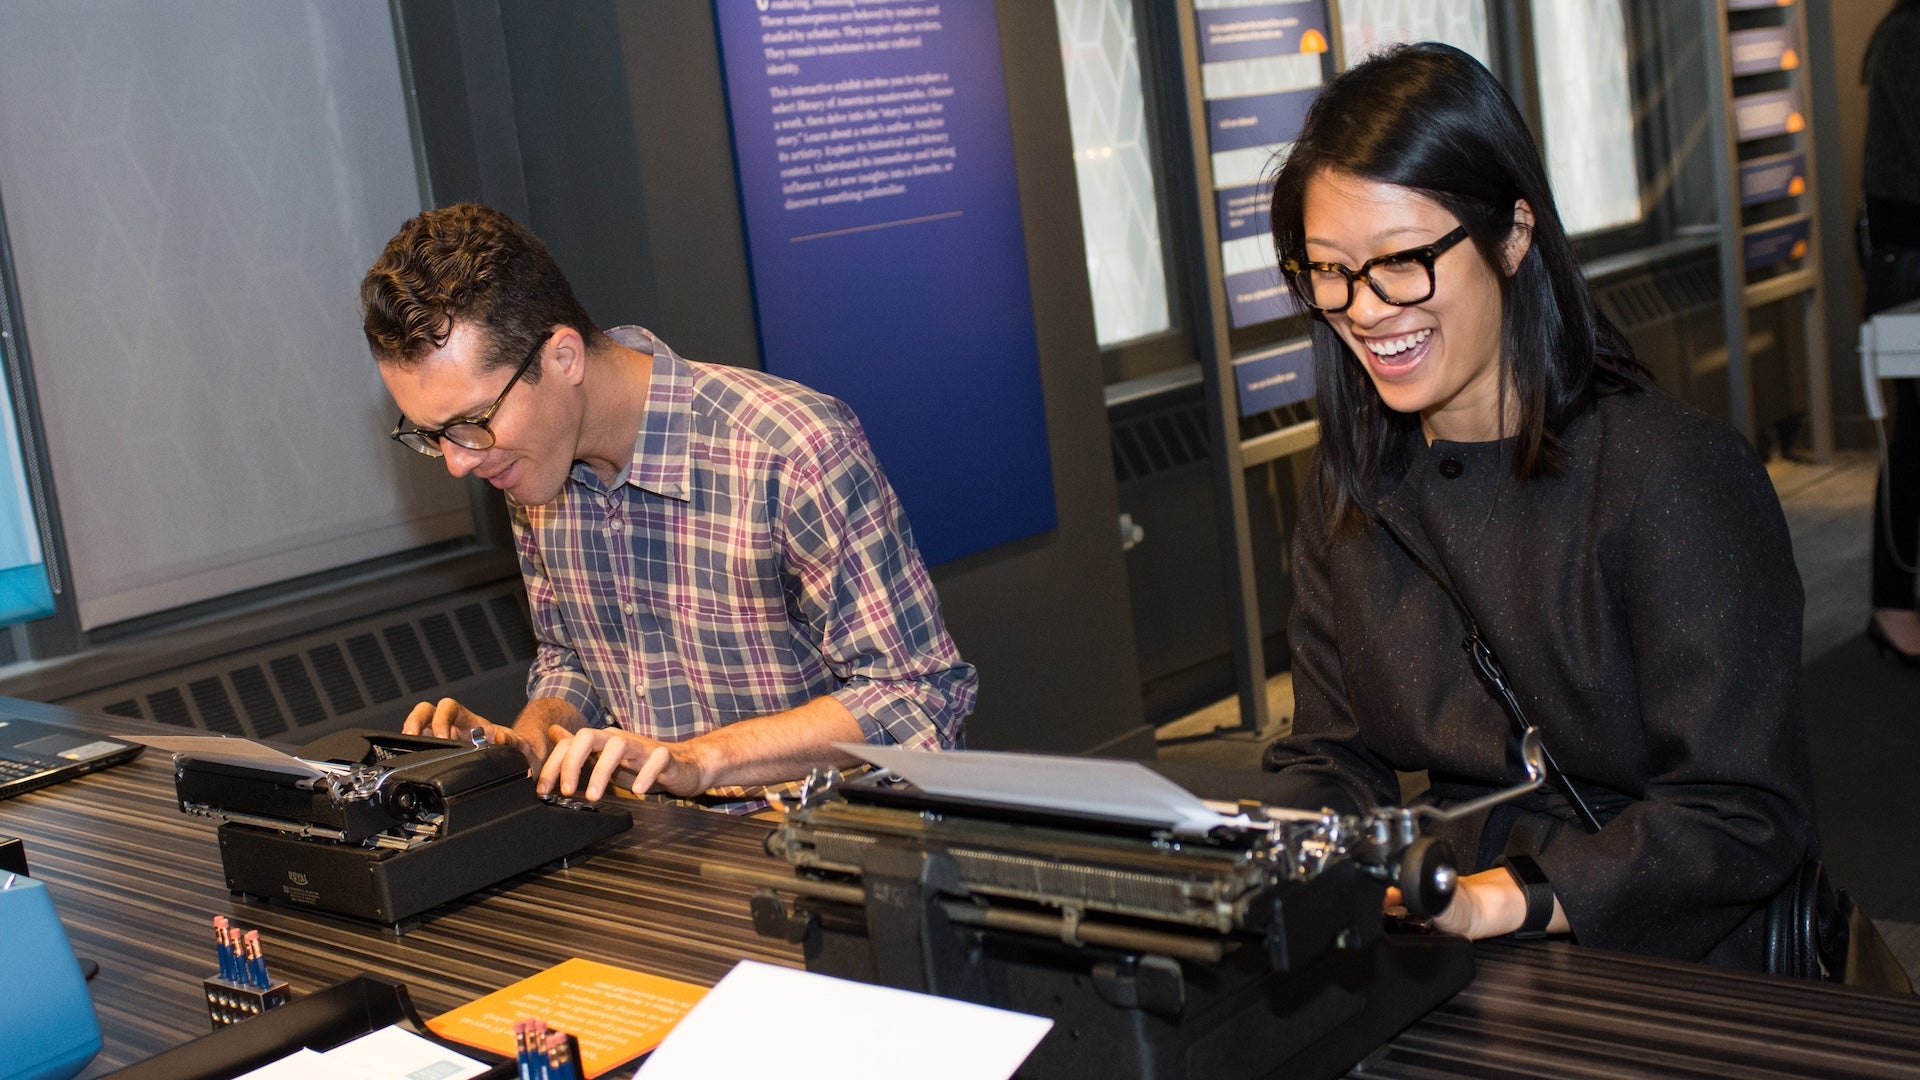 Two people using type writers at a table